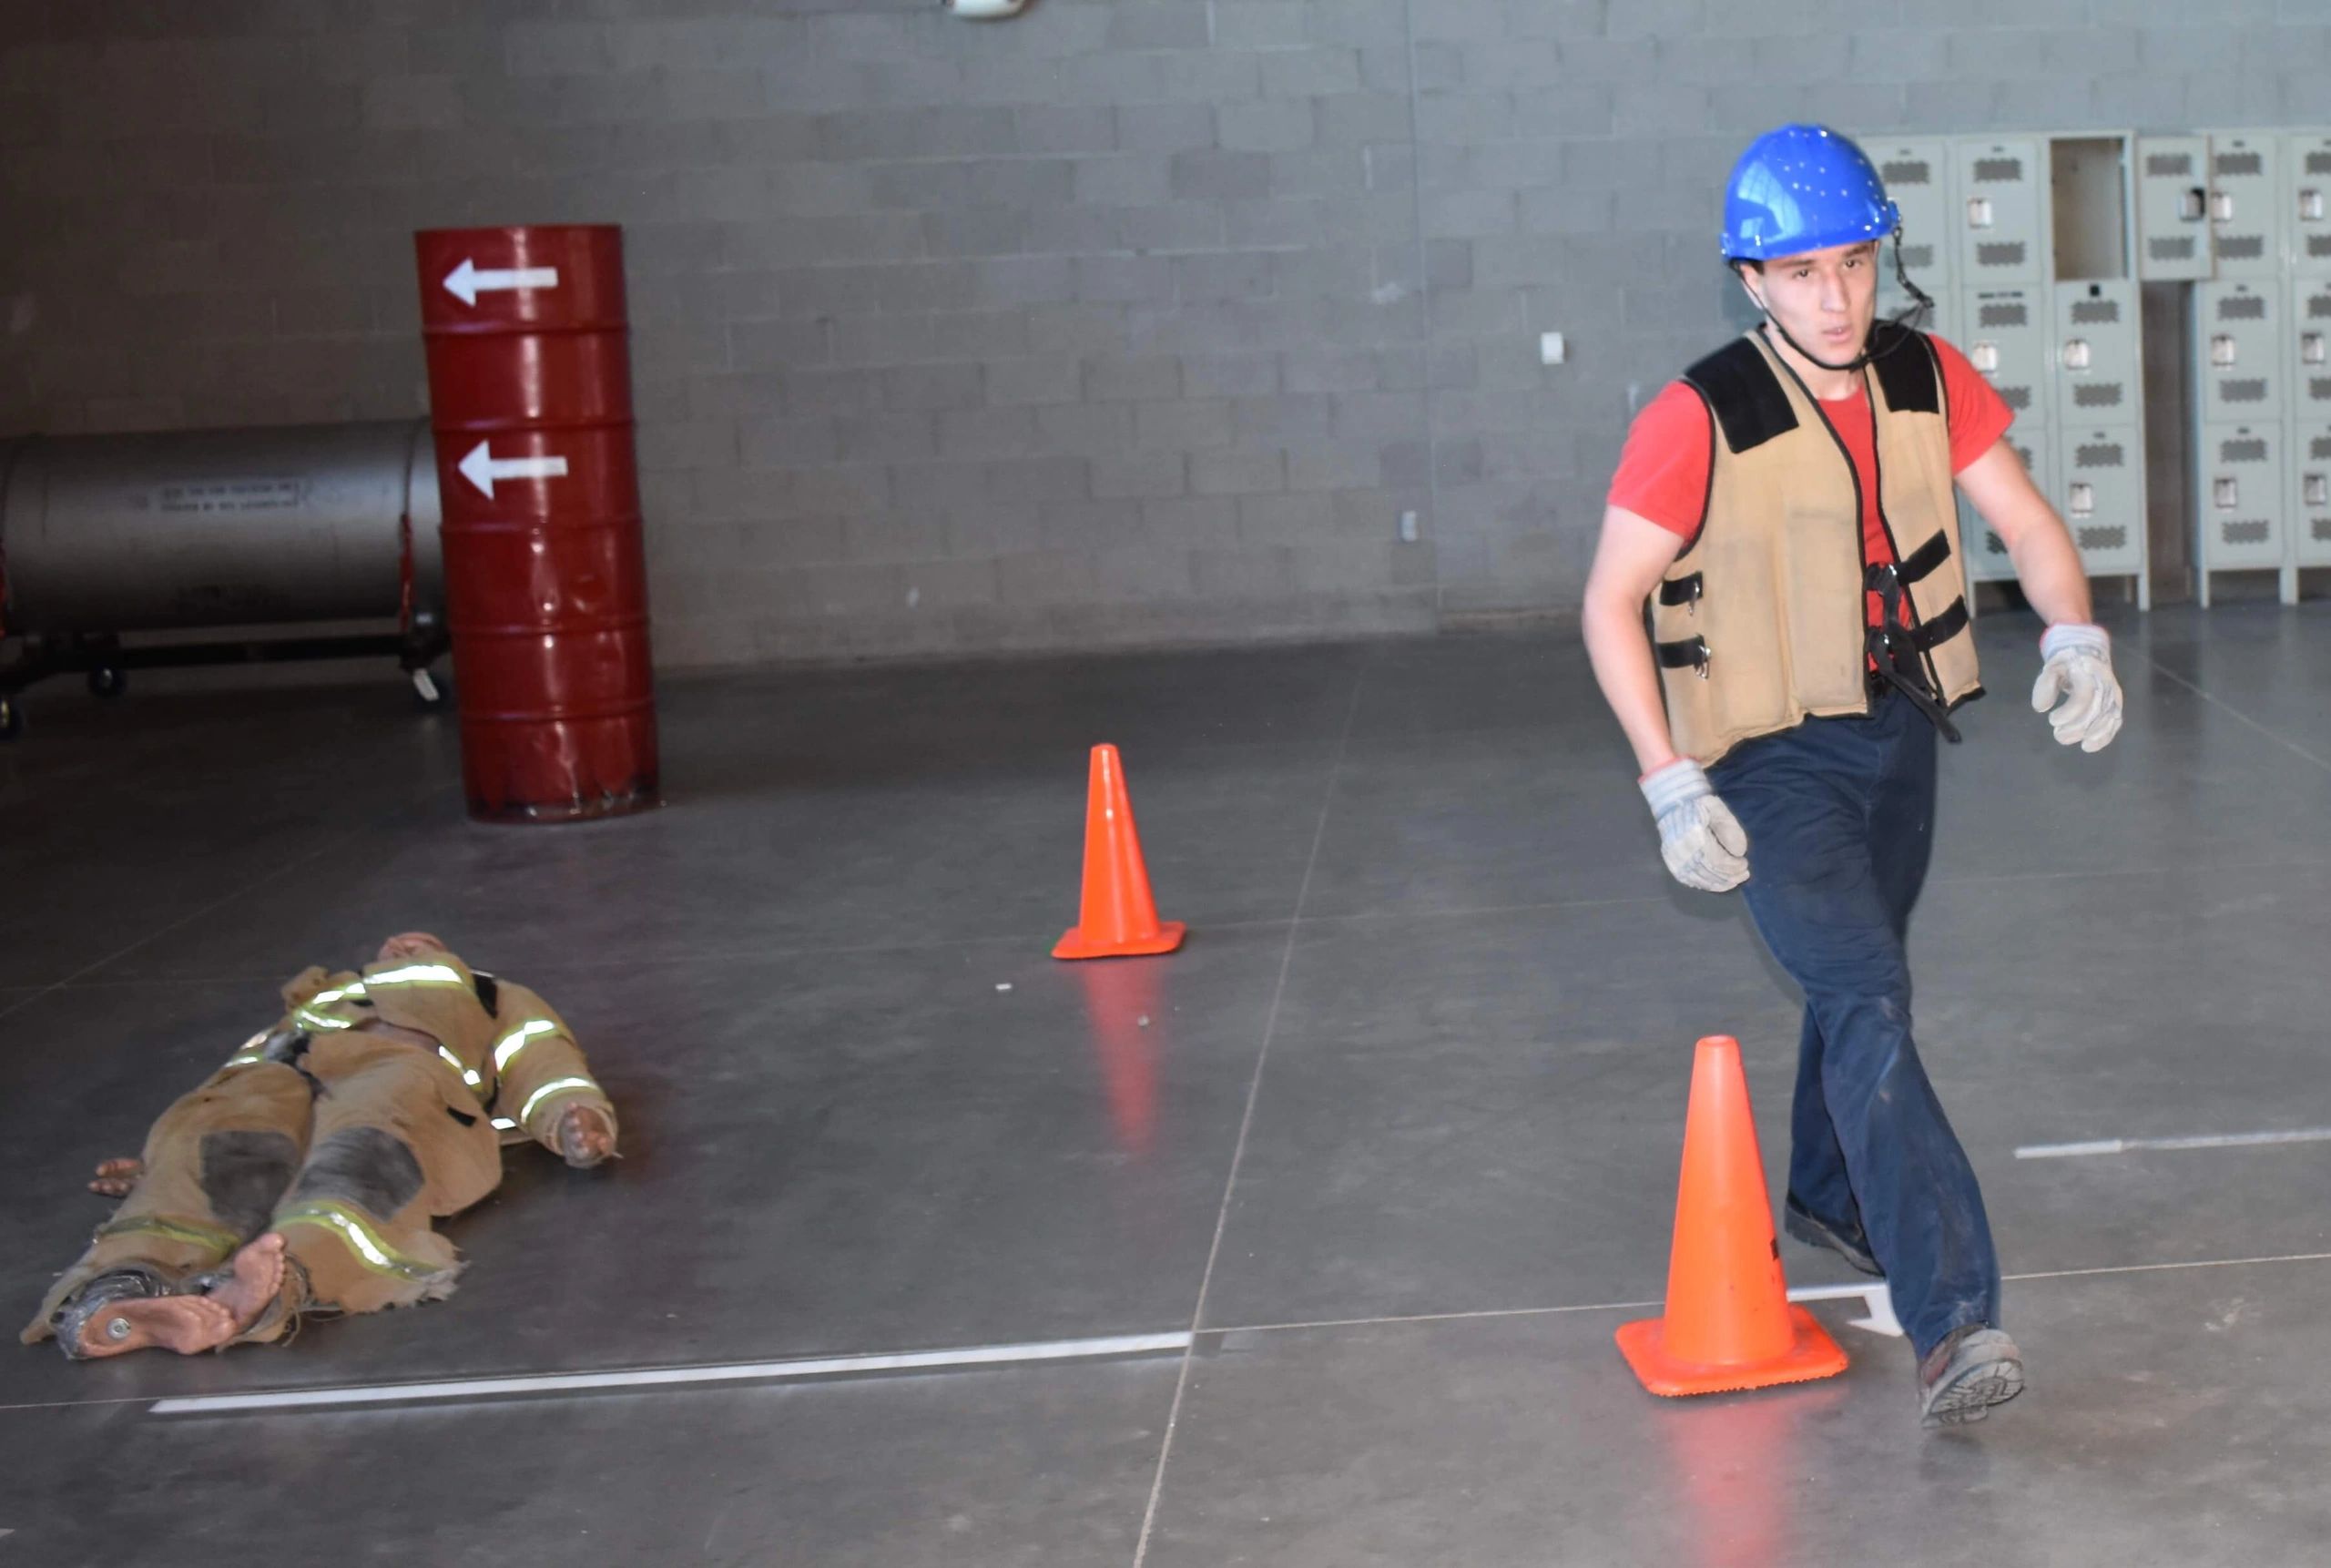 CPAT Test: How to Pass the Firefighter CPAT Test (TODAY)